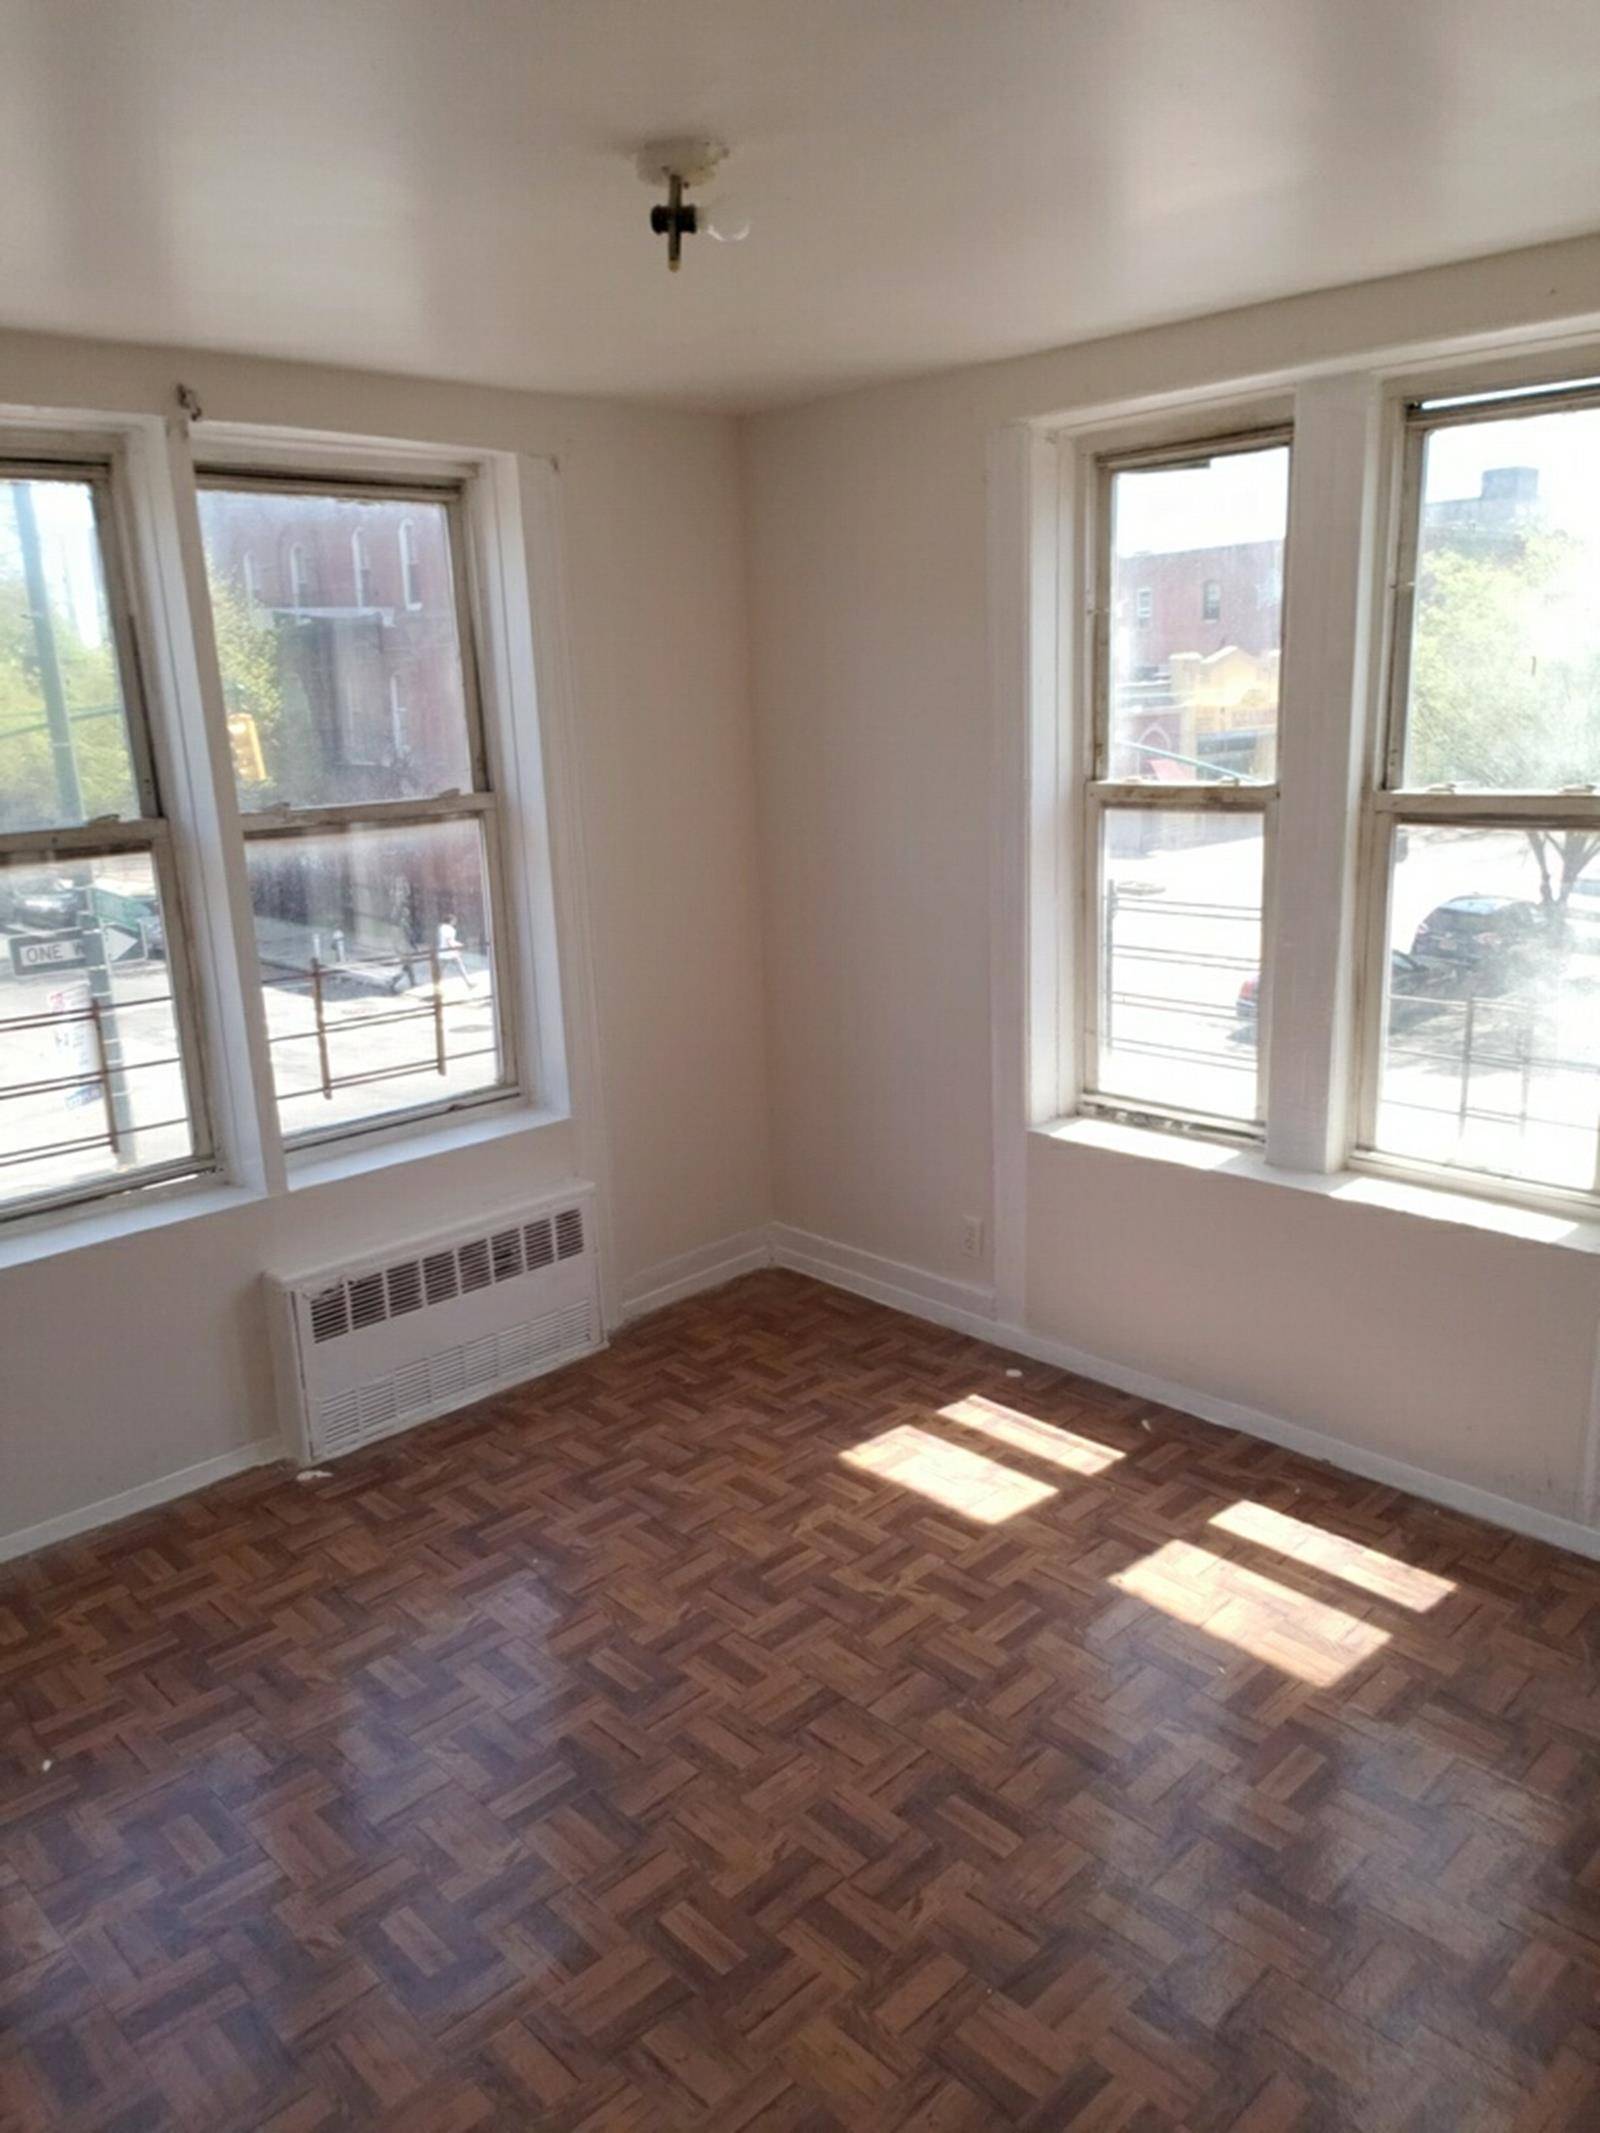 Spacious three bedroom apartment available in Prospect Lefferts Garden.